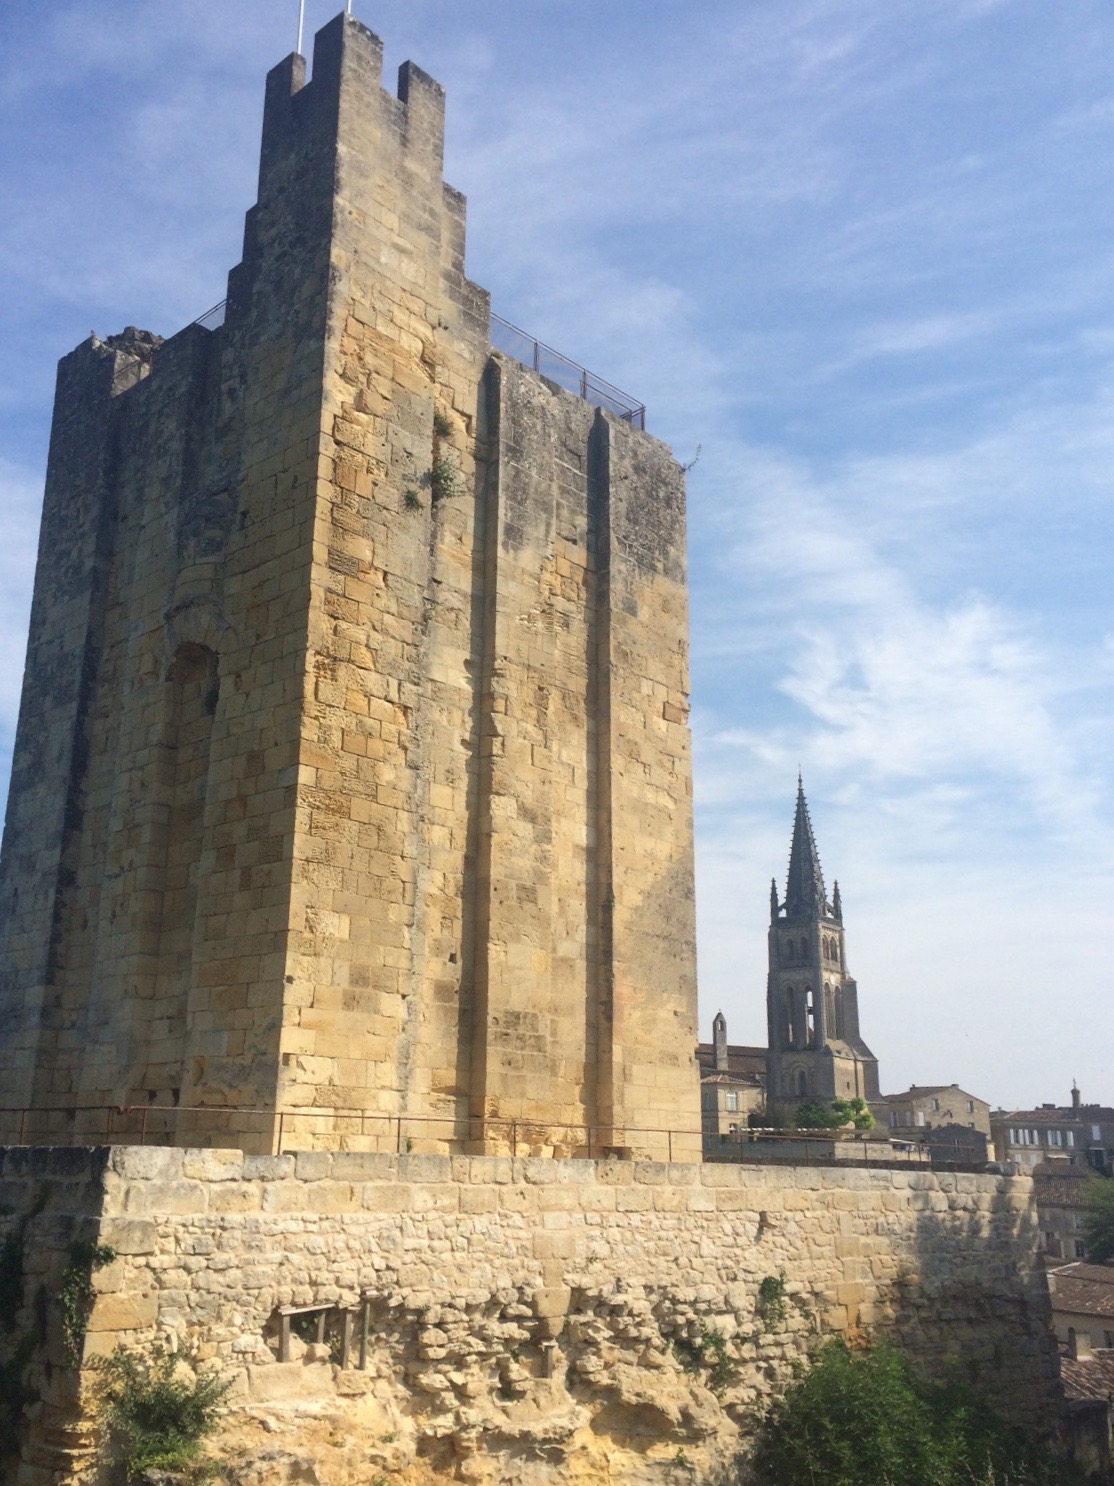 The massive Tour du Roy (King’s Tower) stands near the Église Monolithe (Monolithic Church). Photo by Marla Norman.